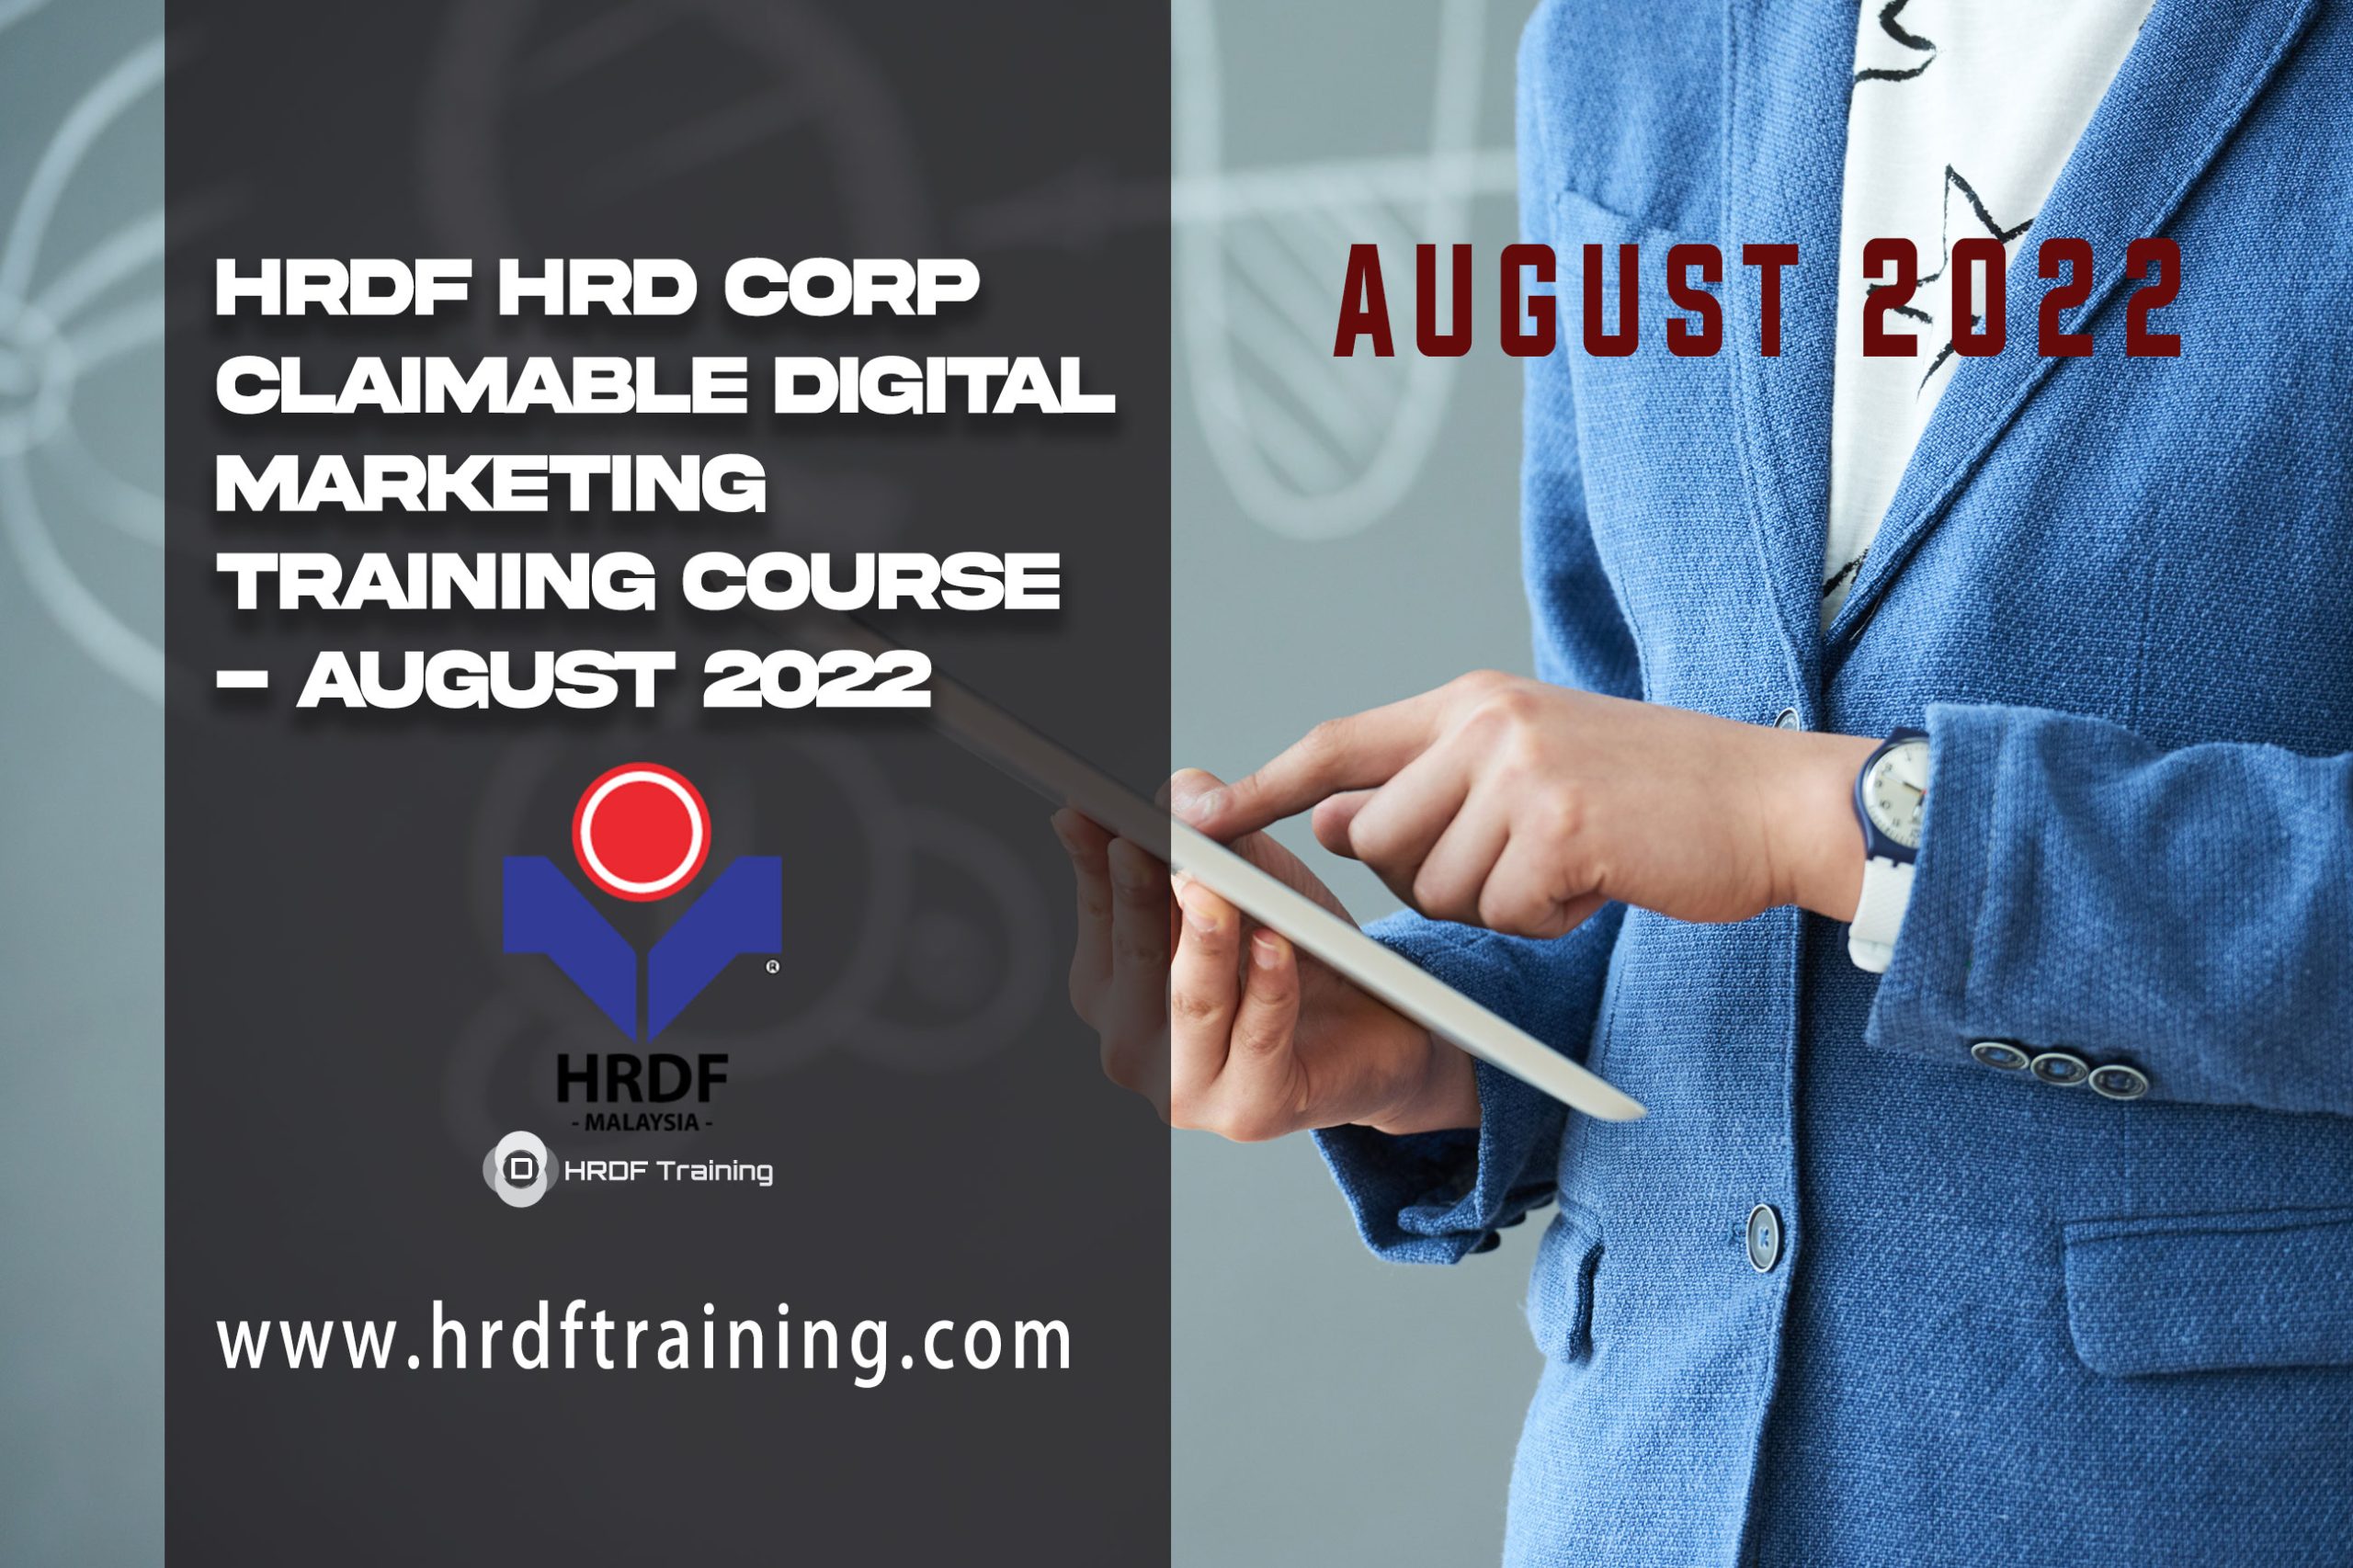 HRDF HRD Corp Claimable Digital Marketing Training Course - August 2022